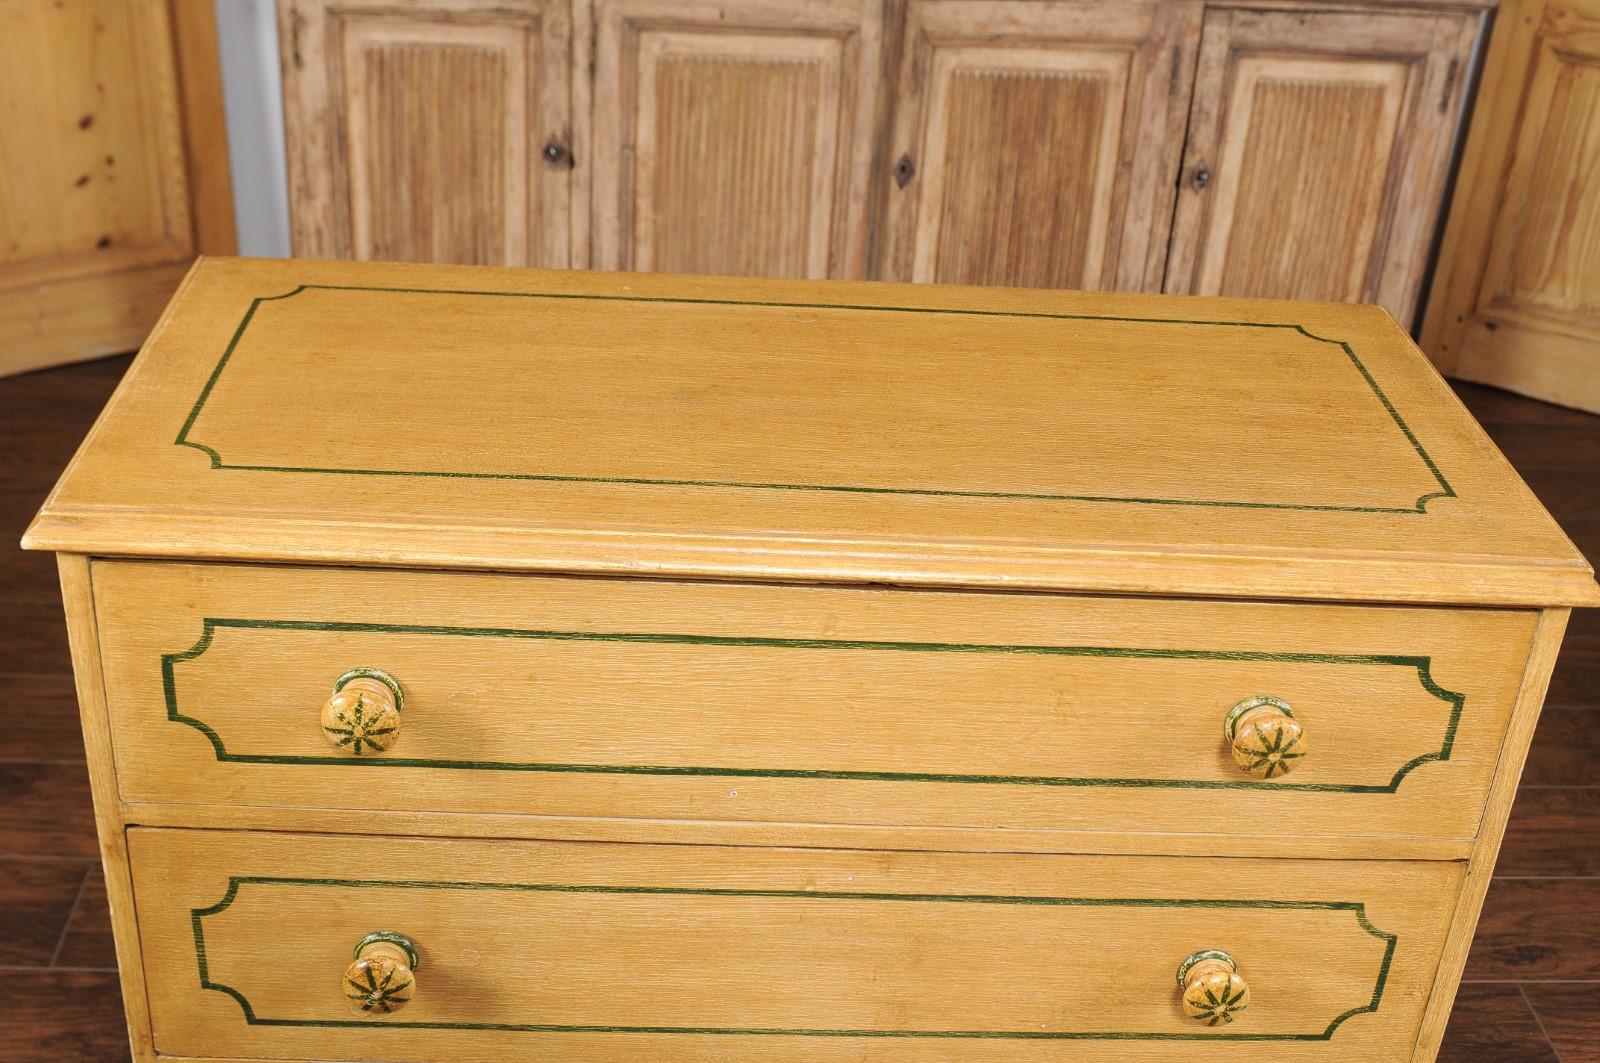 Vintage 1950s English Painted Three-Drawer Commode with Yellow Painted Finish 2